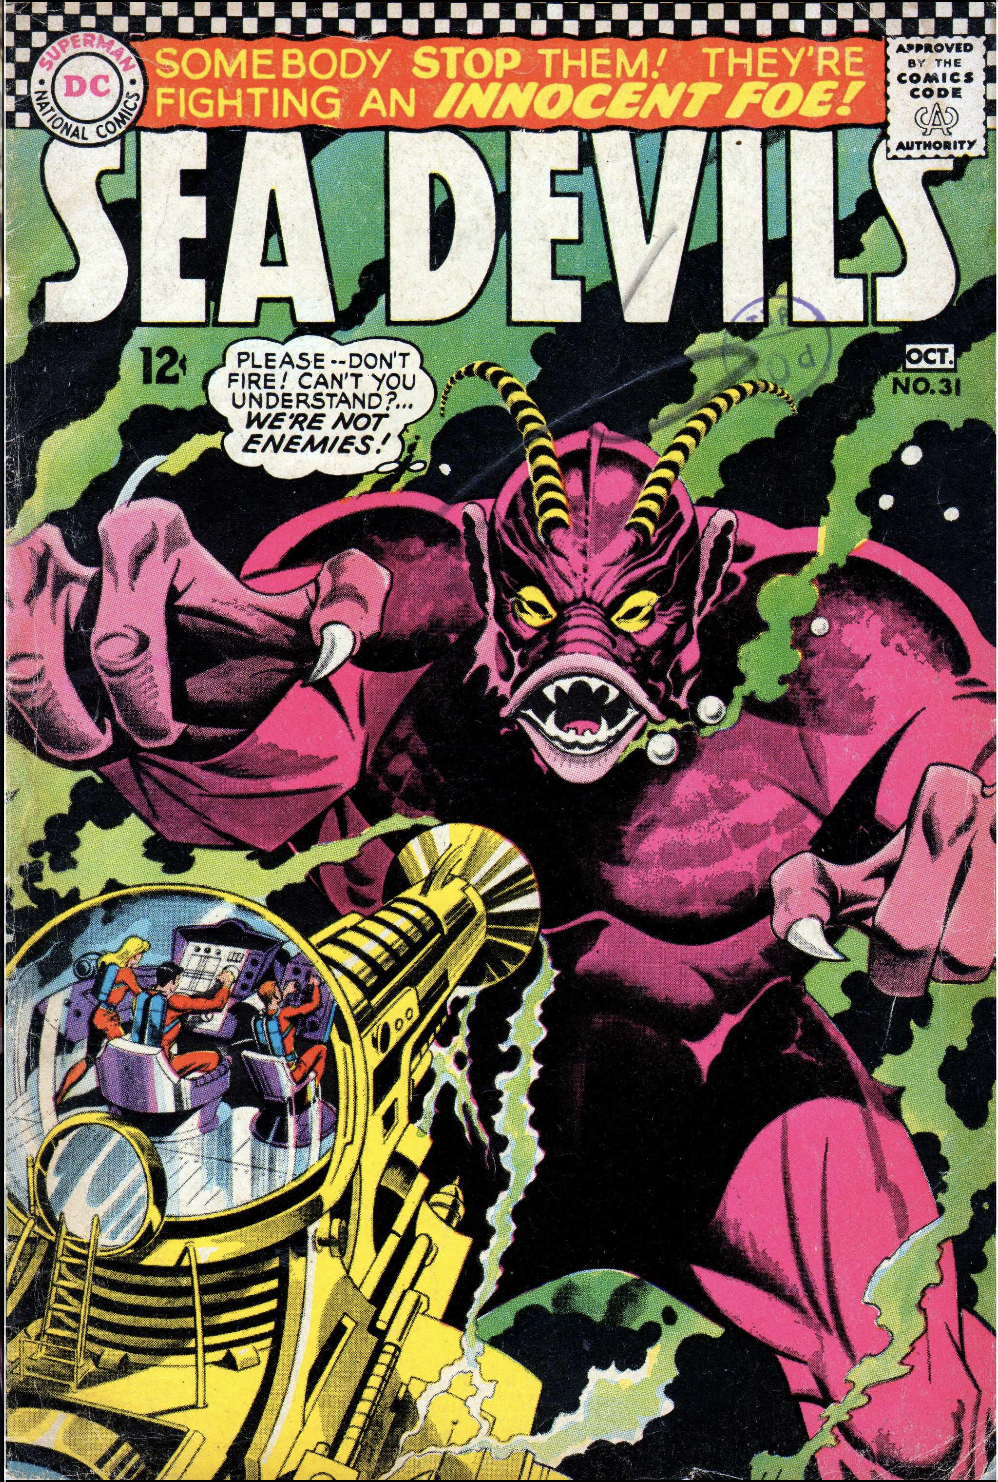 A Whale of a Tale (Sea Devils #31)